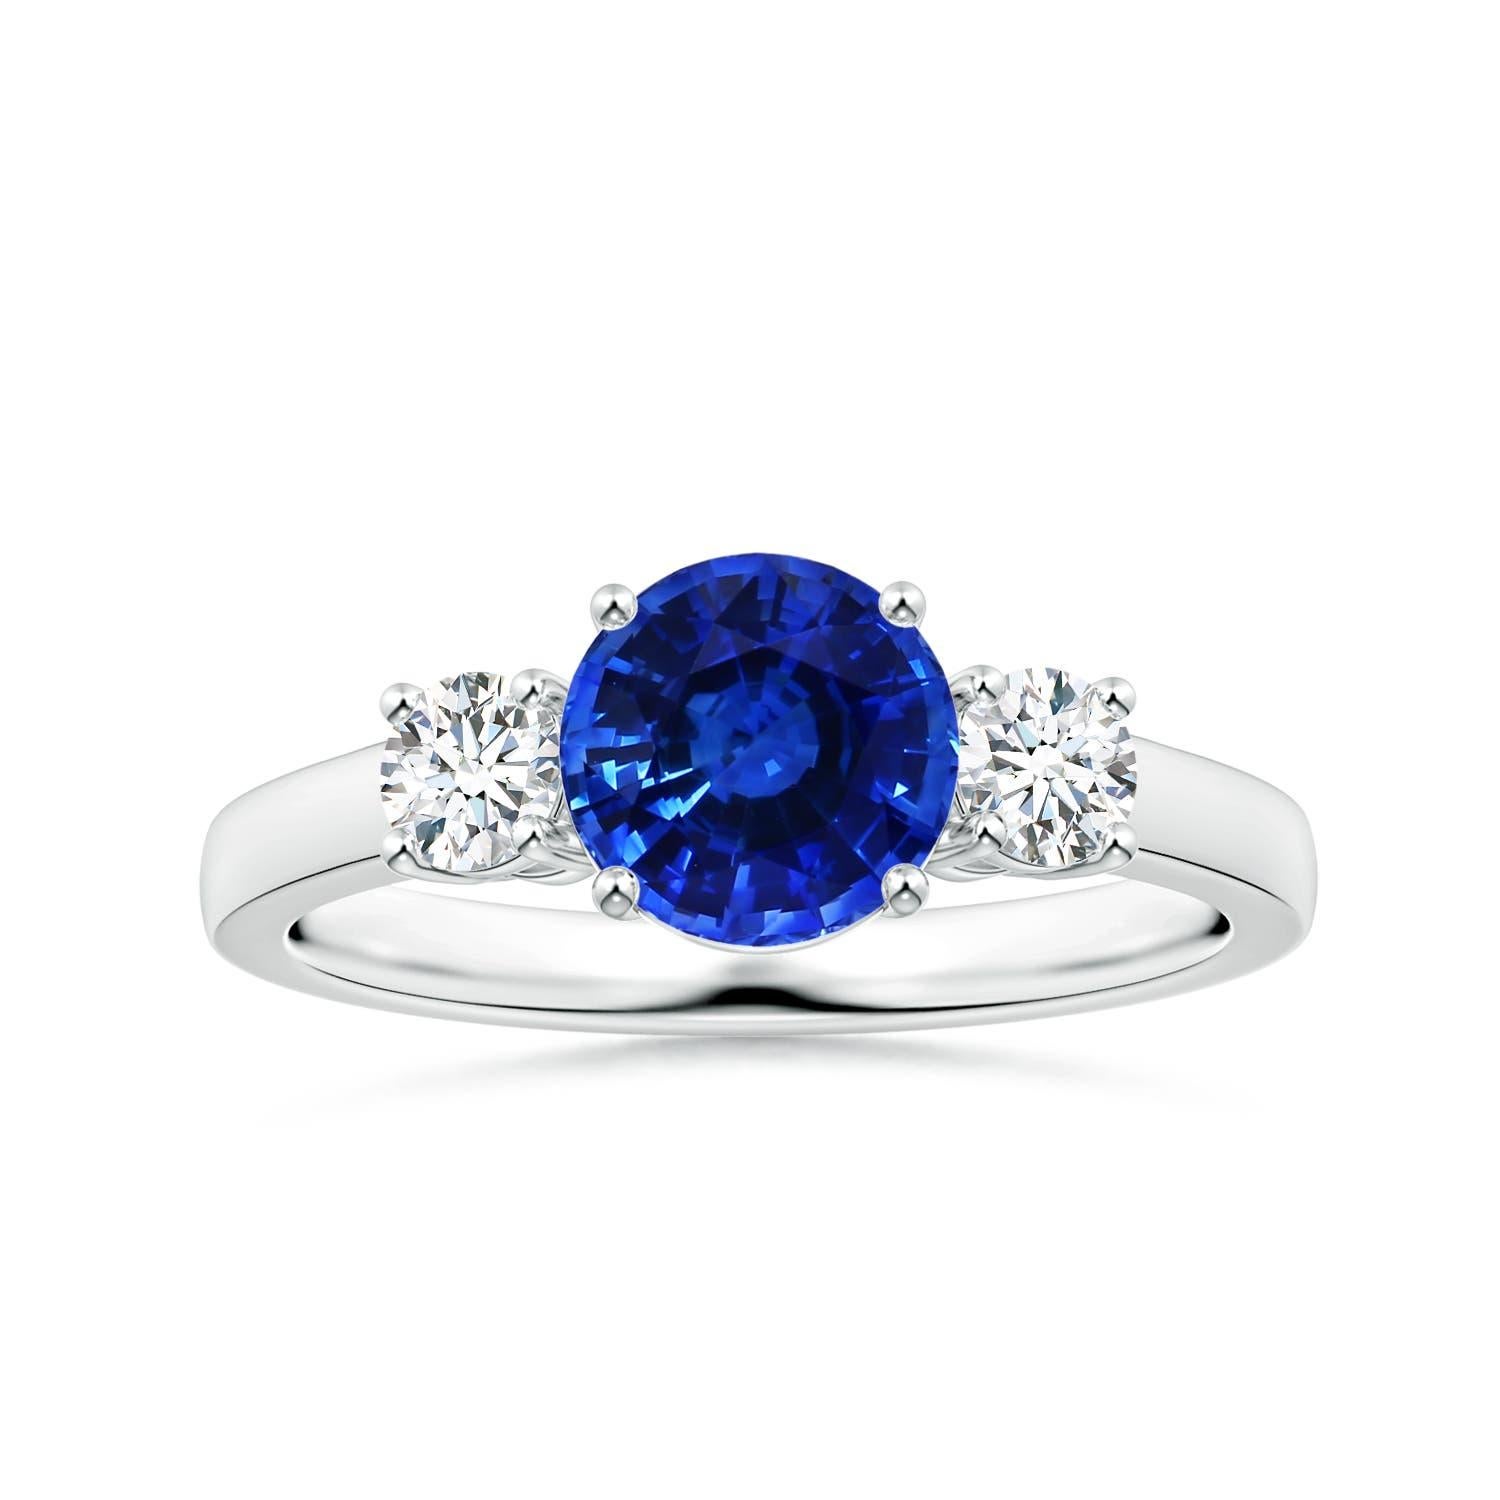 ANGARA Three Stone GIA Certified Blue Sapphire Ring in White Gold with Diamonds